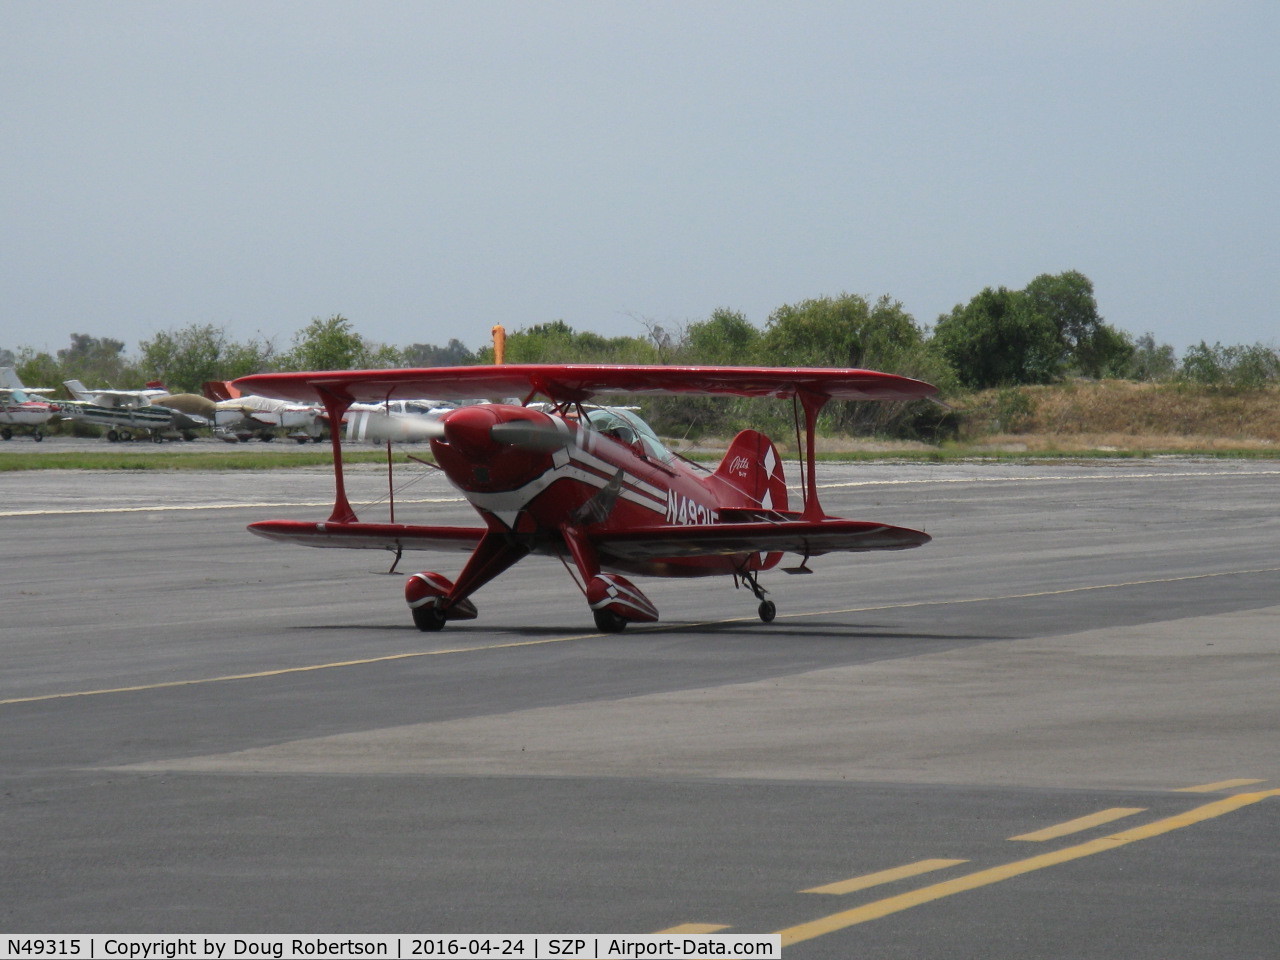 N49315, 1983 Pitts S-1T Special C/N 1013, 1983 Pitts Aerobatics S-1T SPECIAL, Lycoming AEIO-360 180 Hp, taxi to Rwy 22